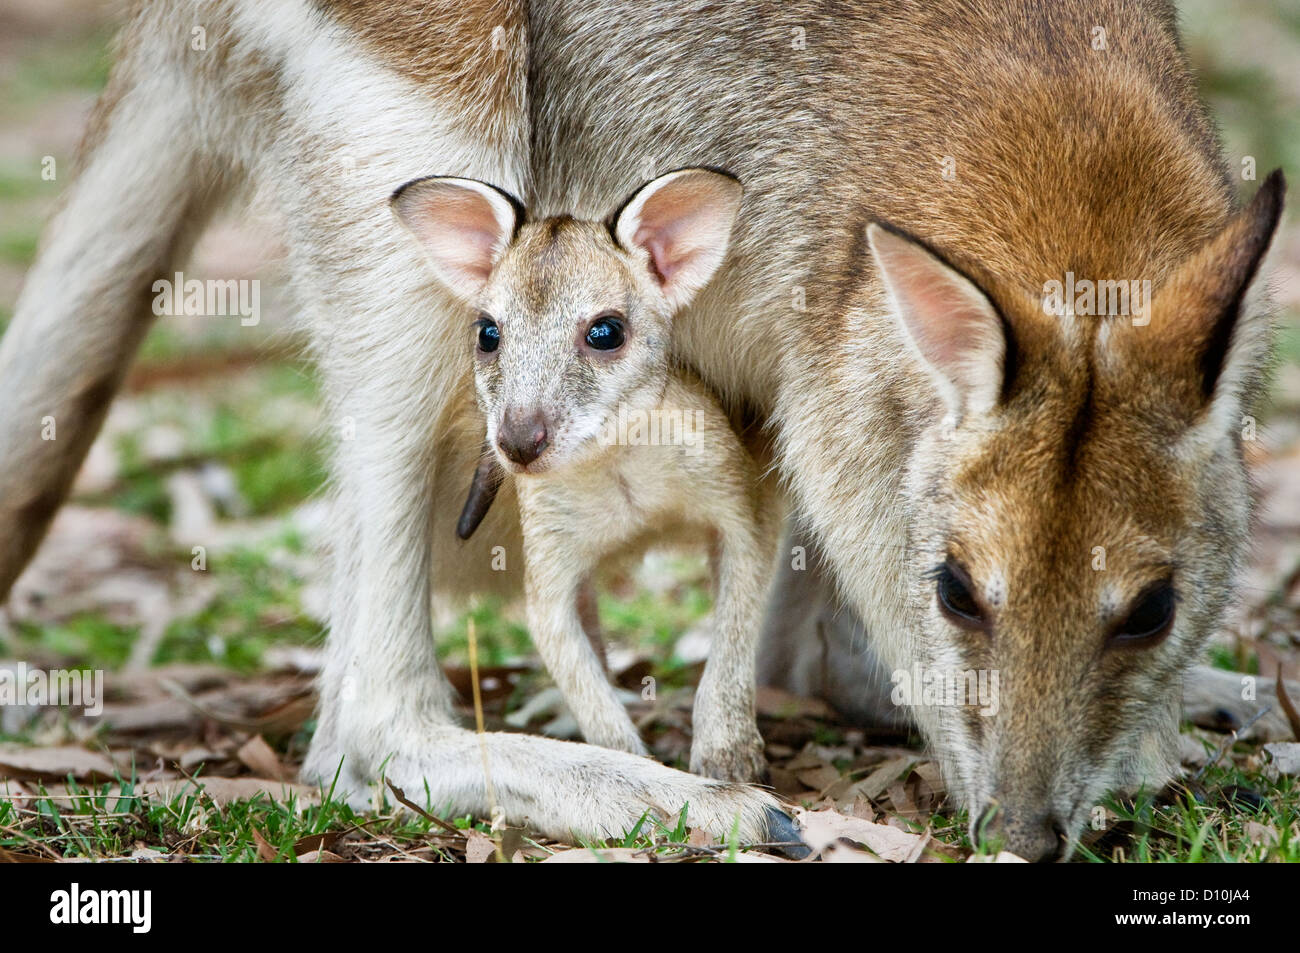 Joey of an Agile Wallaby watching attentively. Stock Photo